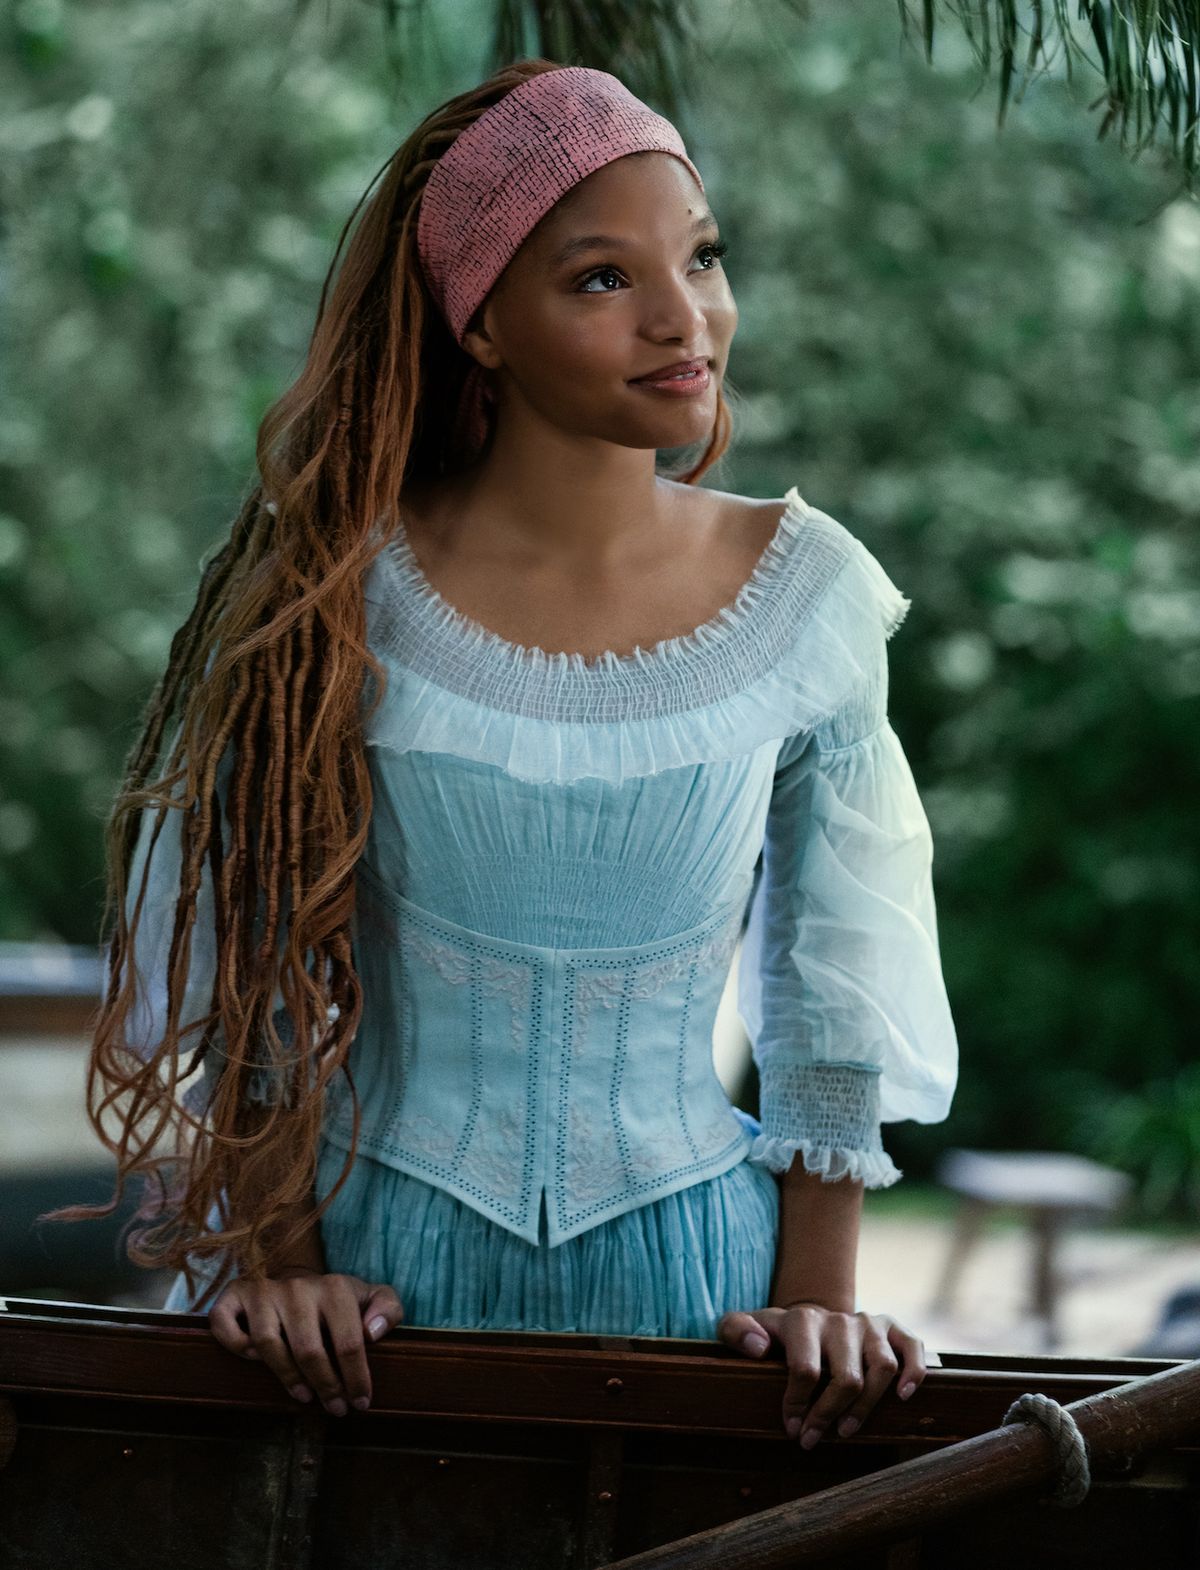 halle bailey as ariel in disney’s live action the little mermaid, directed by rob marshall photo by giles keyte © 2021 disney enterprises inc all rights reserved